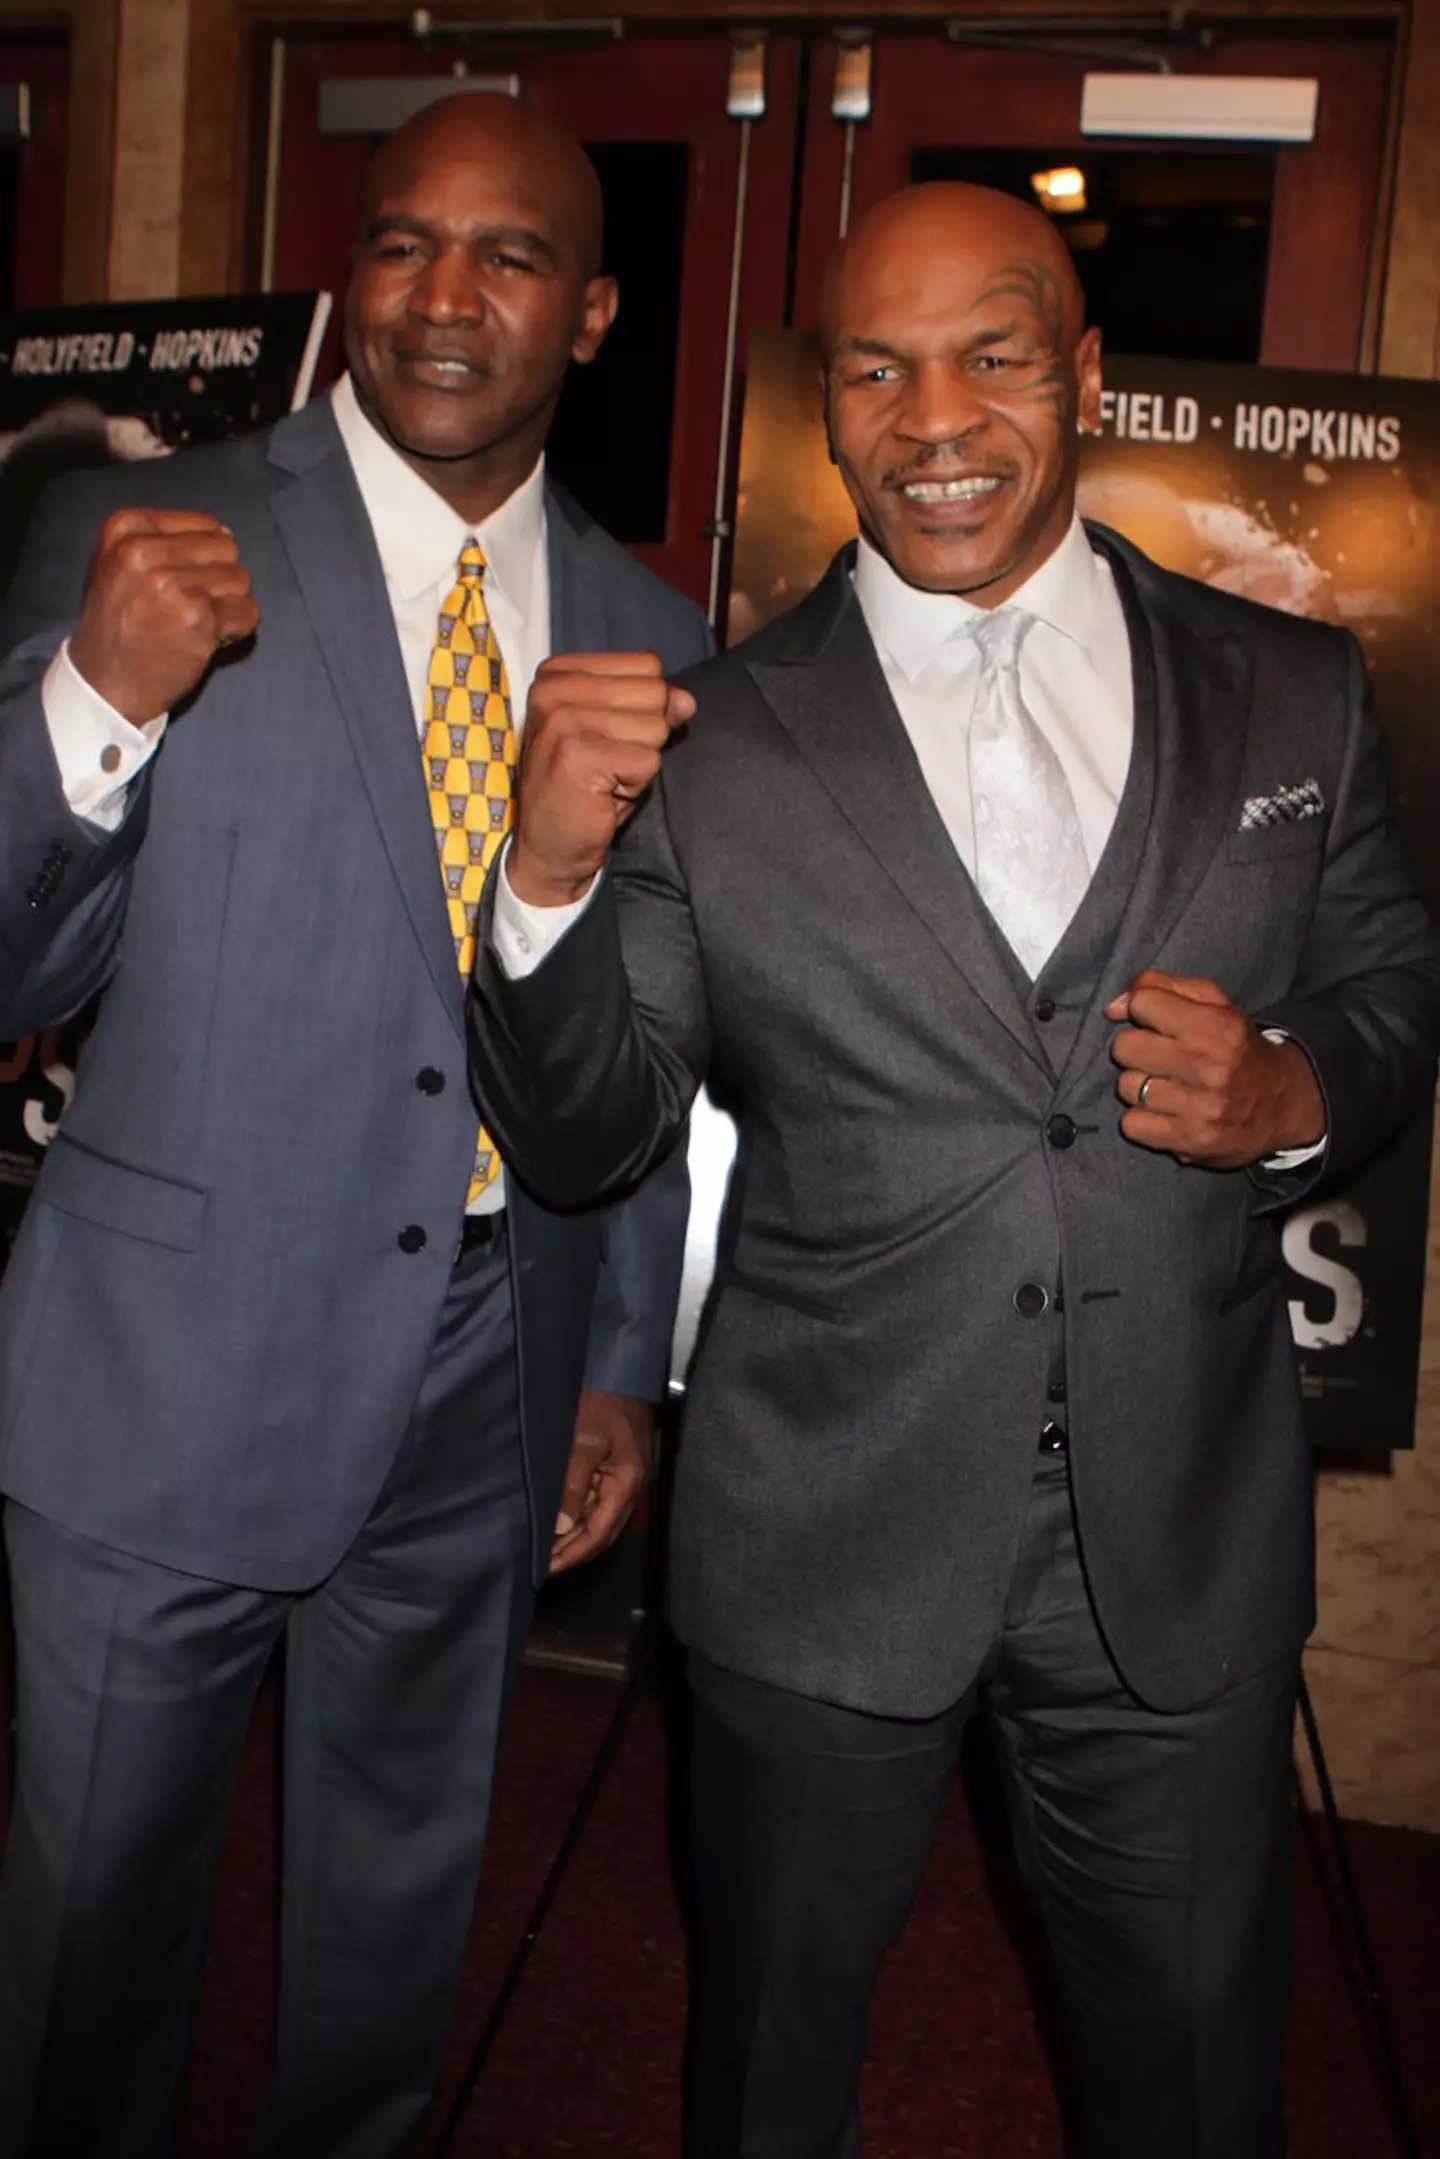 Mike Tyson and Evander Holyfield are now good buddies, despite the bizarre incident.